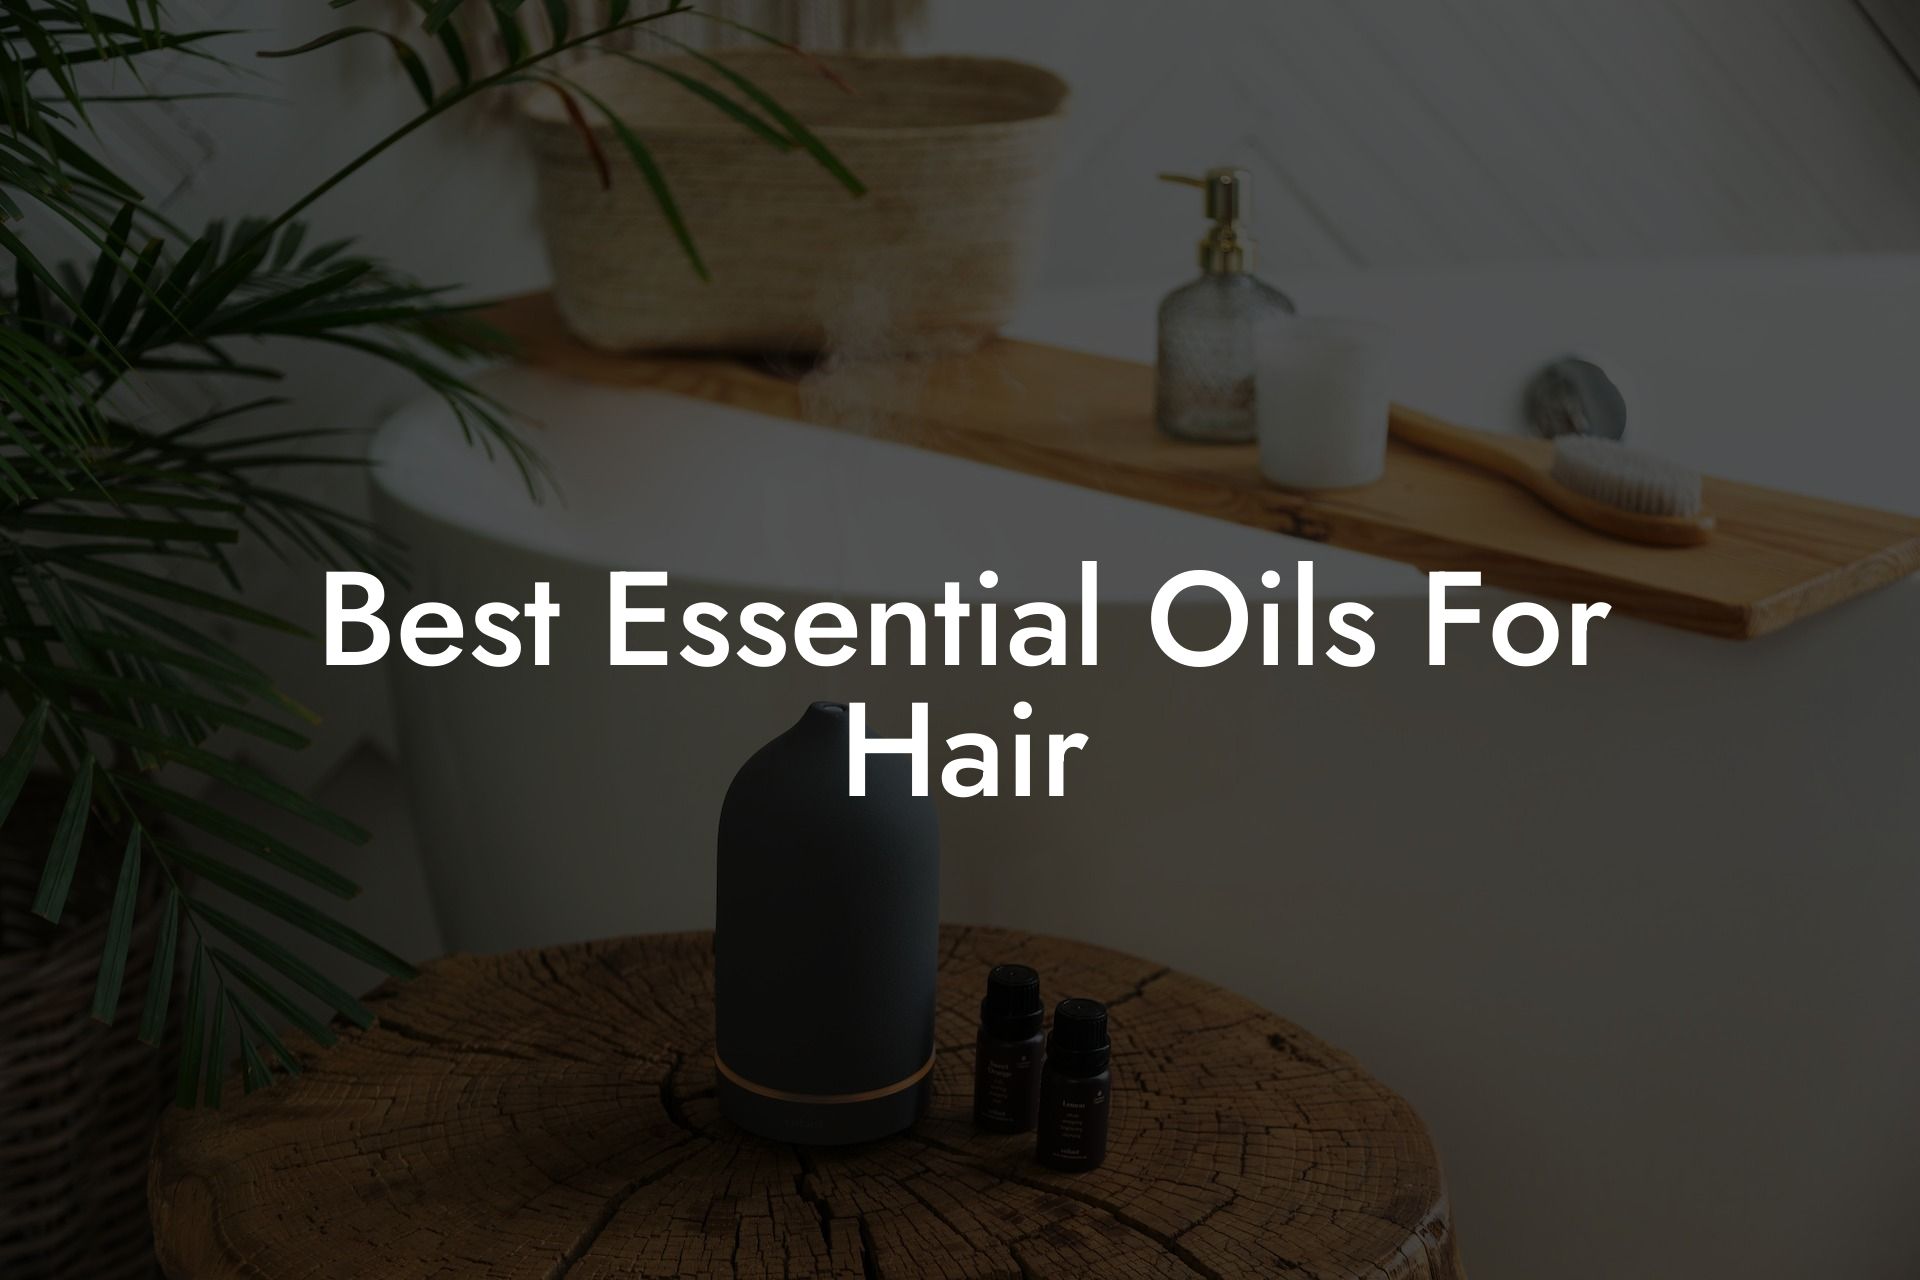 Best Essential Oils For Hair